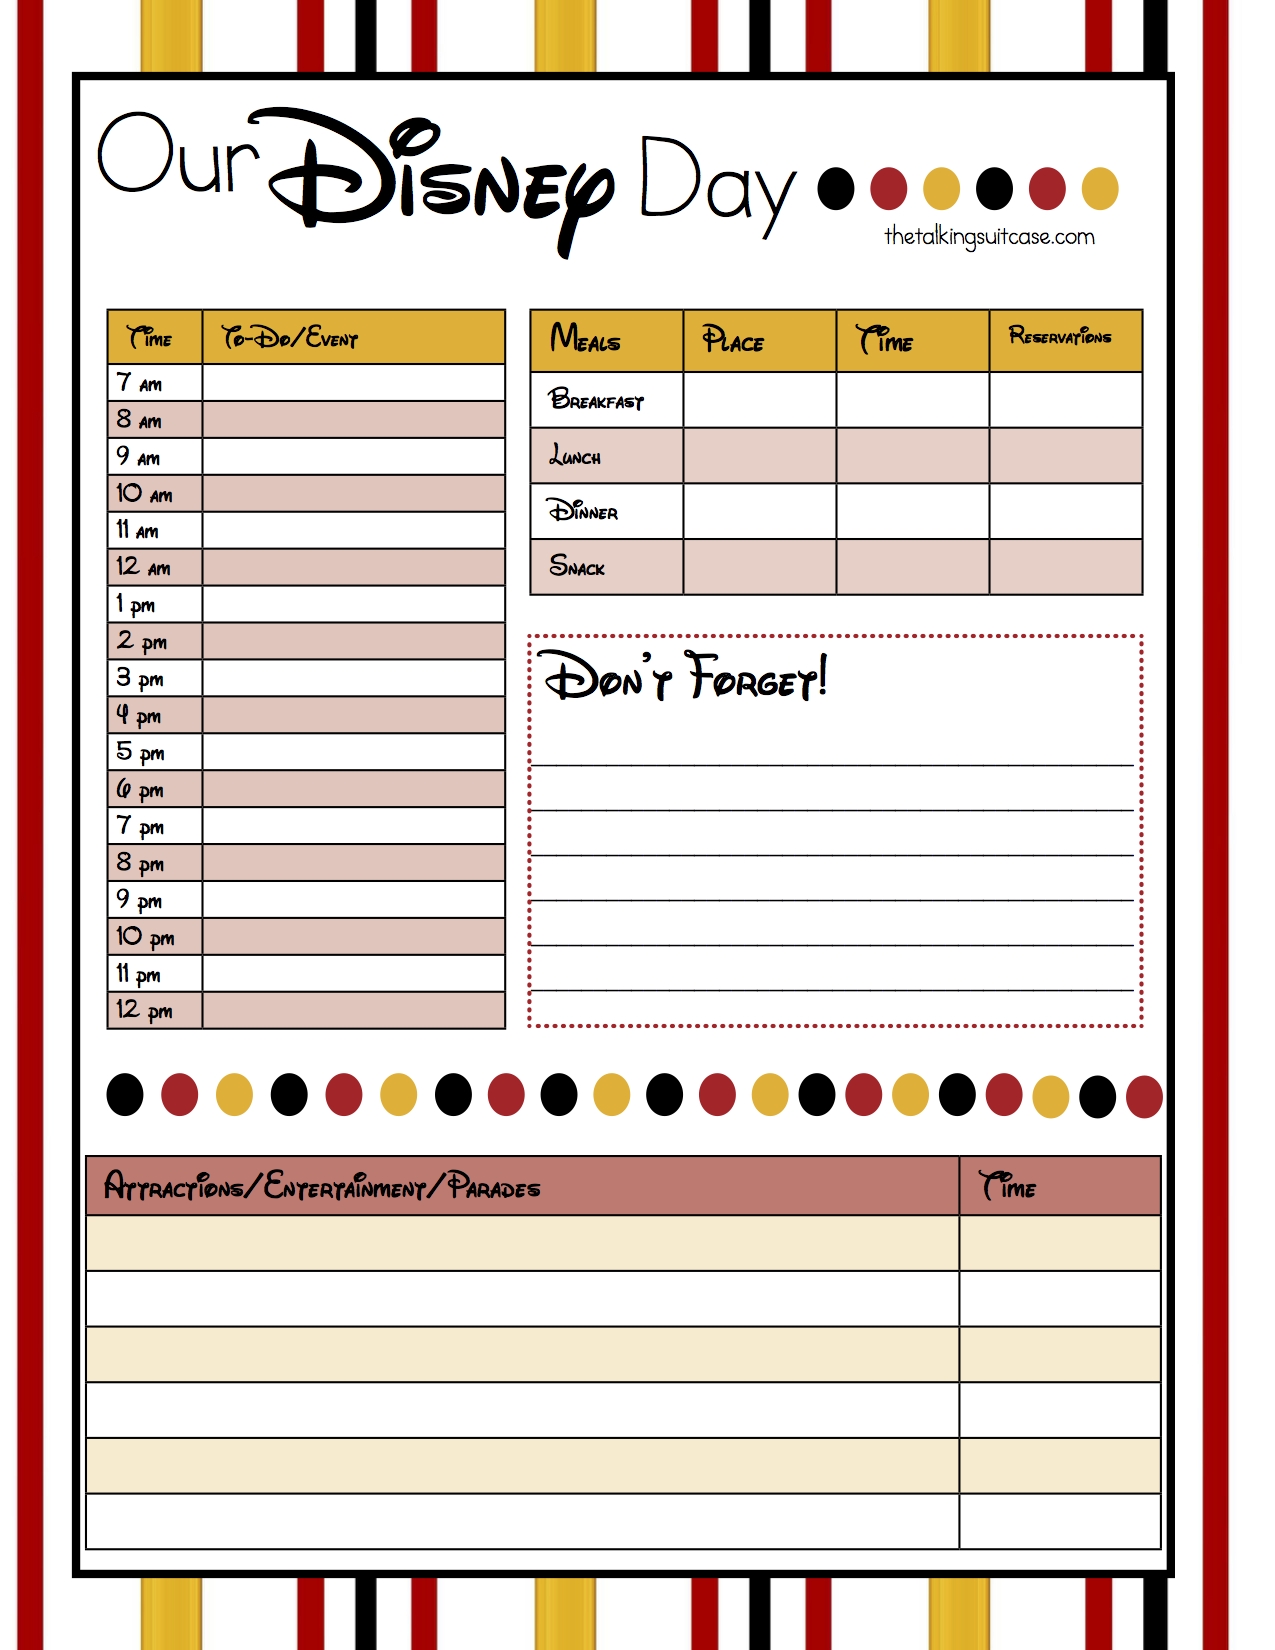 Get Ready For Your Disney Vacation - Free Printable Disney-Editable Disney Template Itinerary